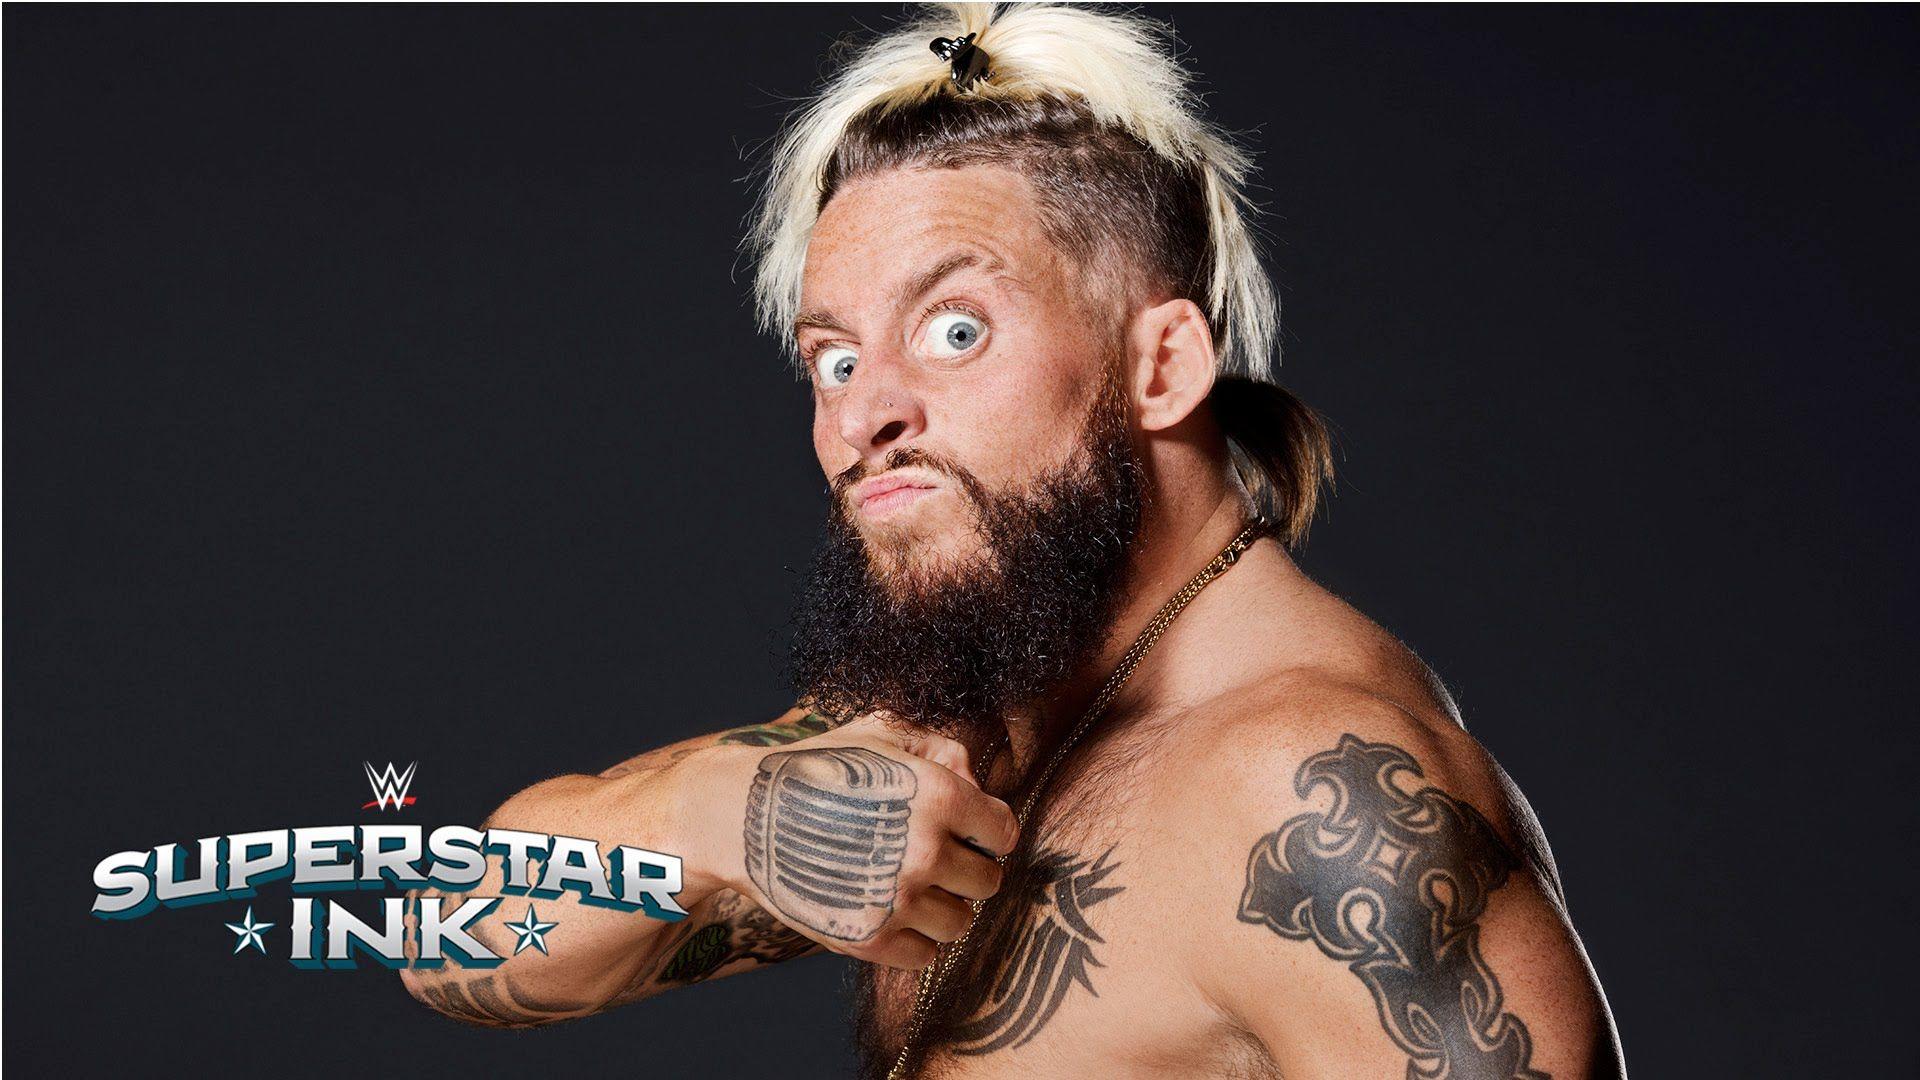 Which WWE Legend did Enzo Amore honor with a tattoo?: Superstar